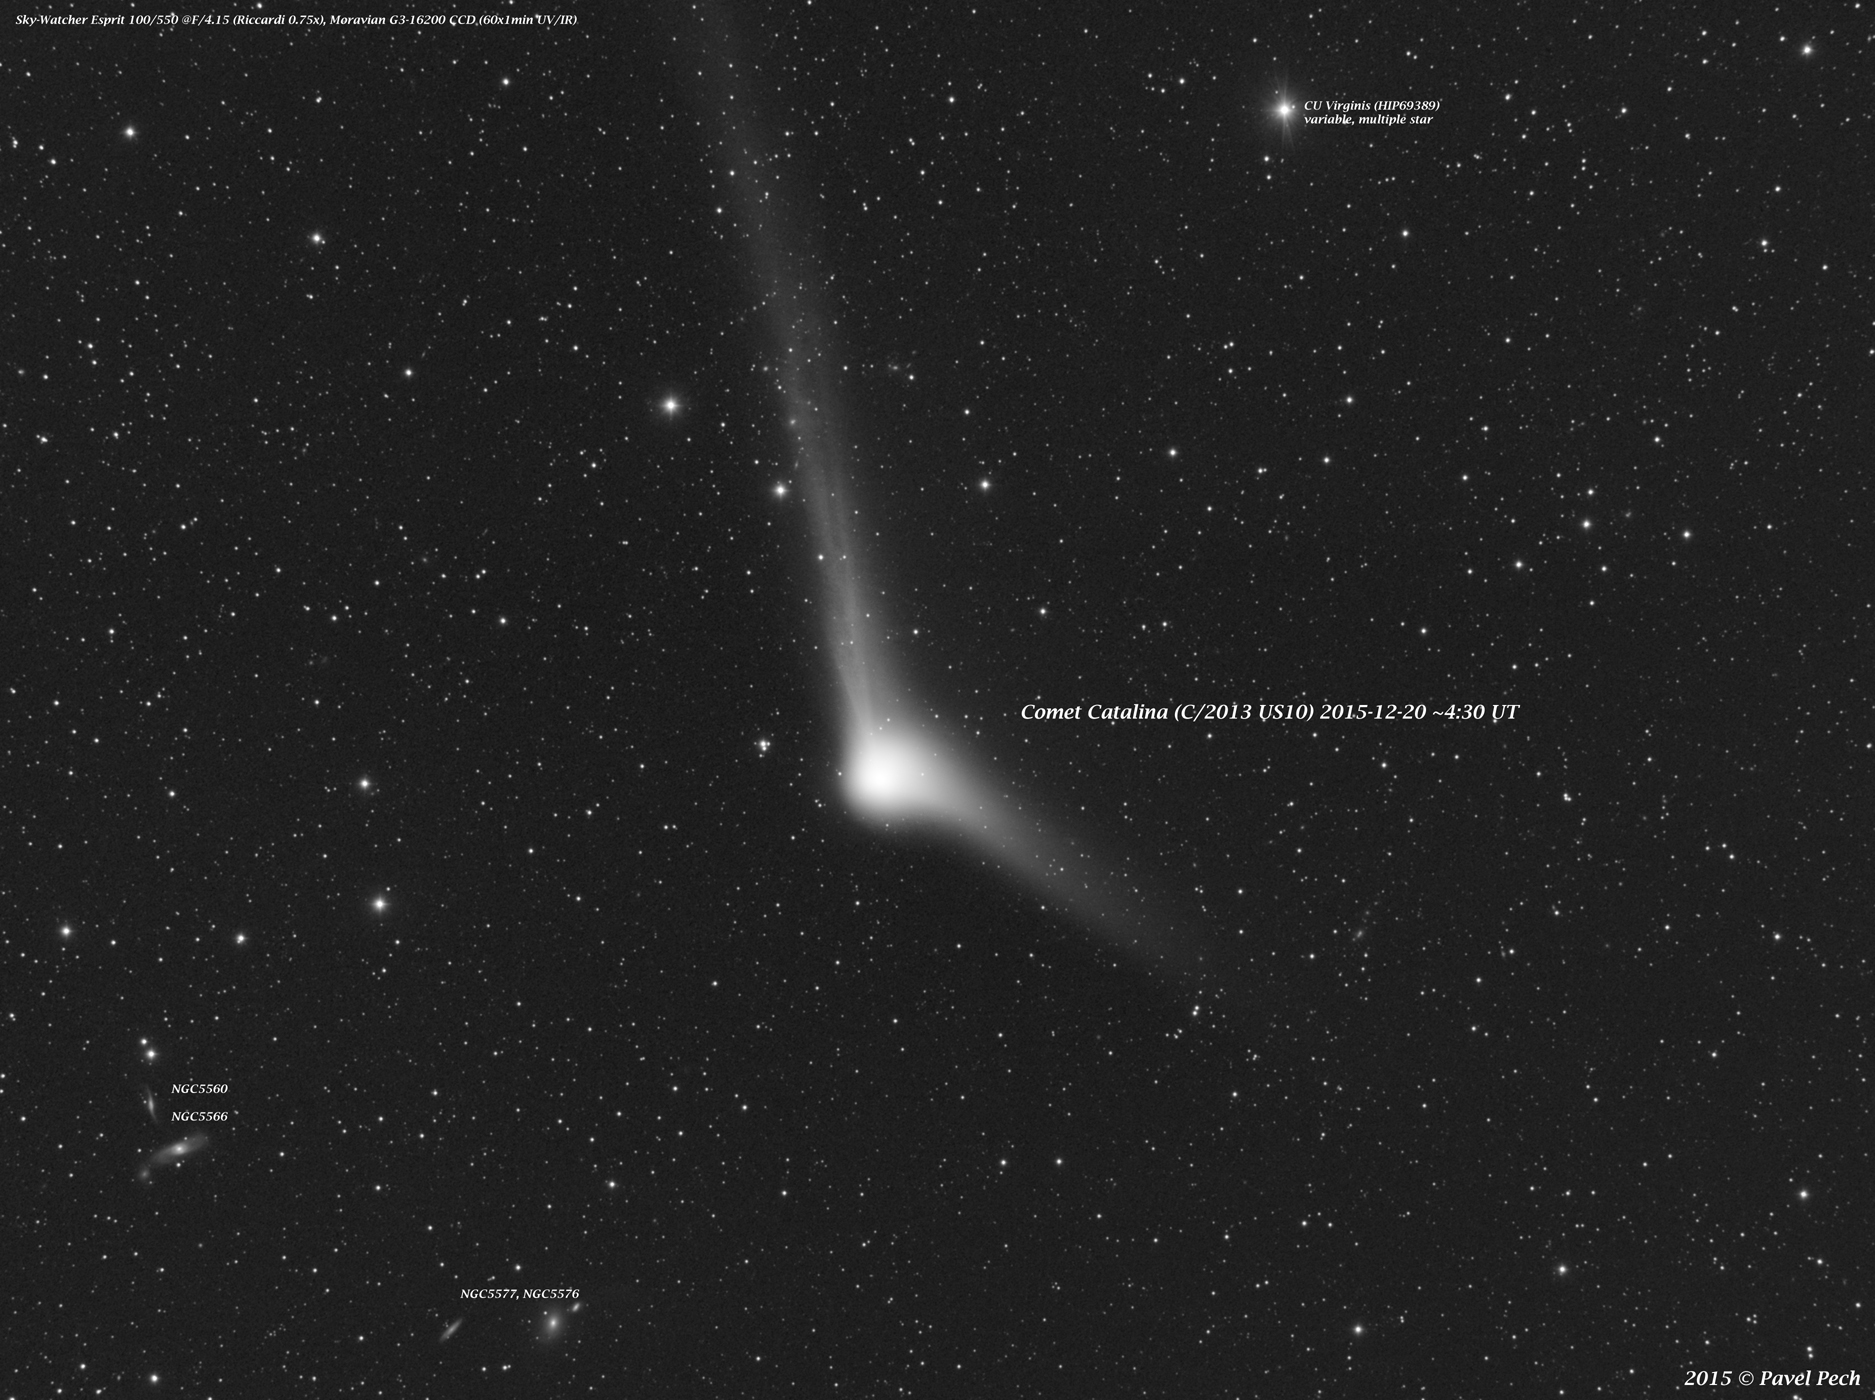 Catalina C/2013 US10 w/o startrails, annotated